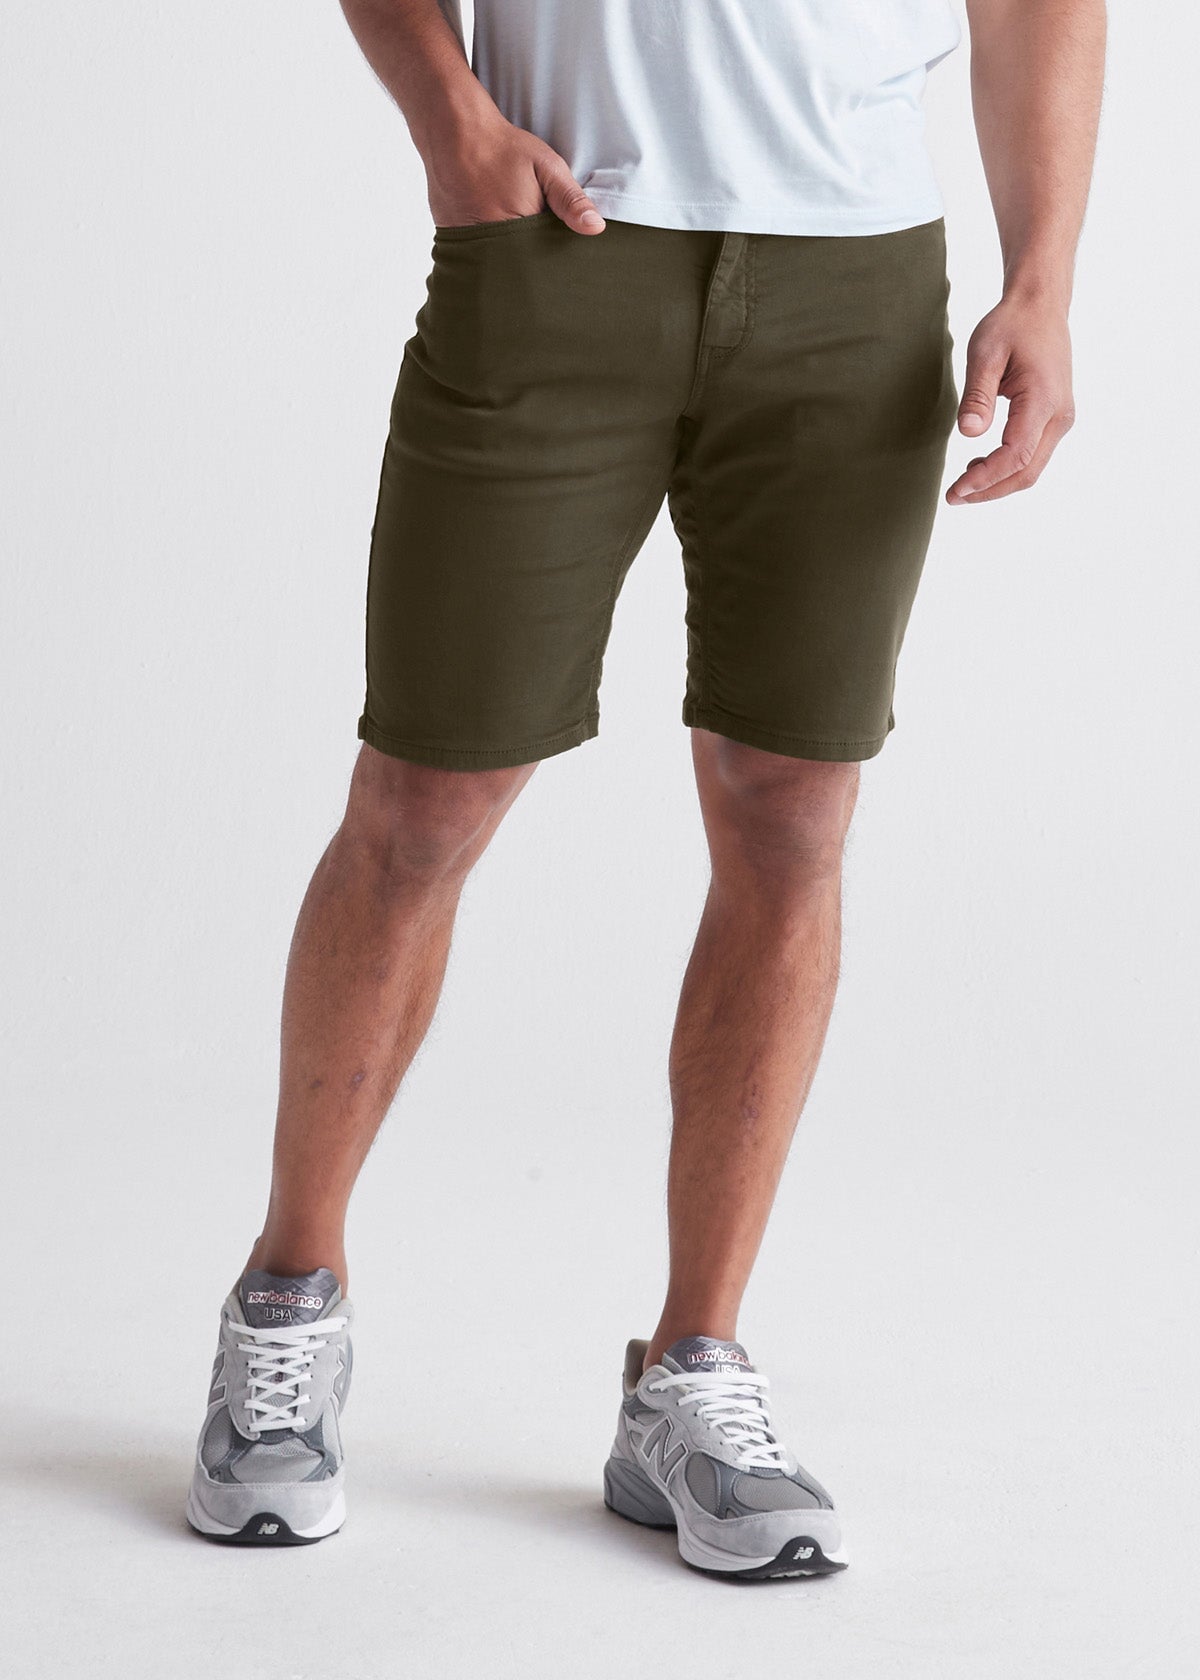 Men's Army Green Relaxed Fit Performance Short